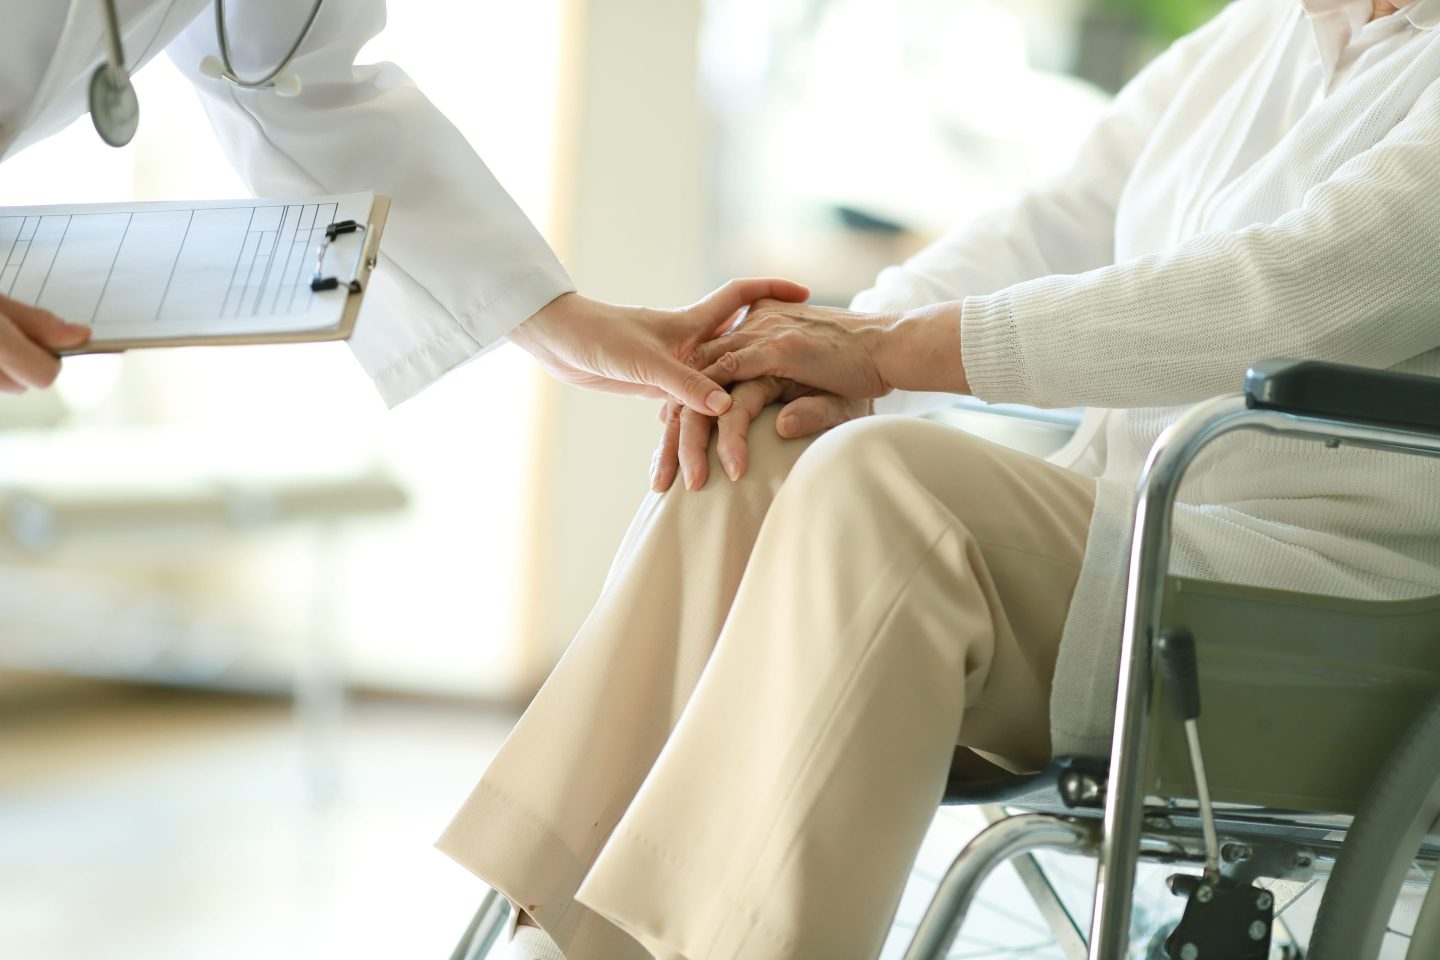 Older person sits in wheelchair as doctor places hand on theirs.